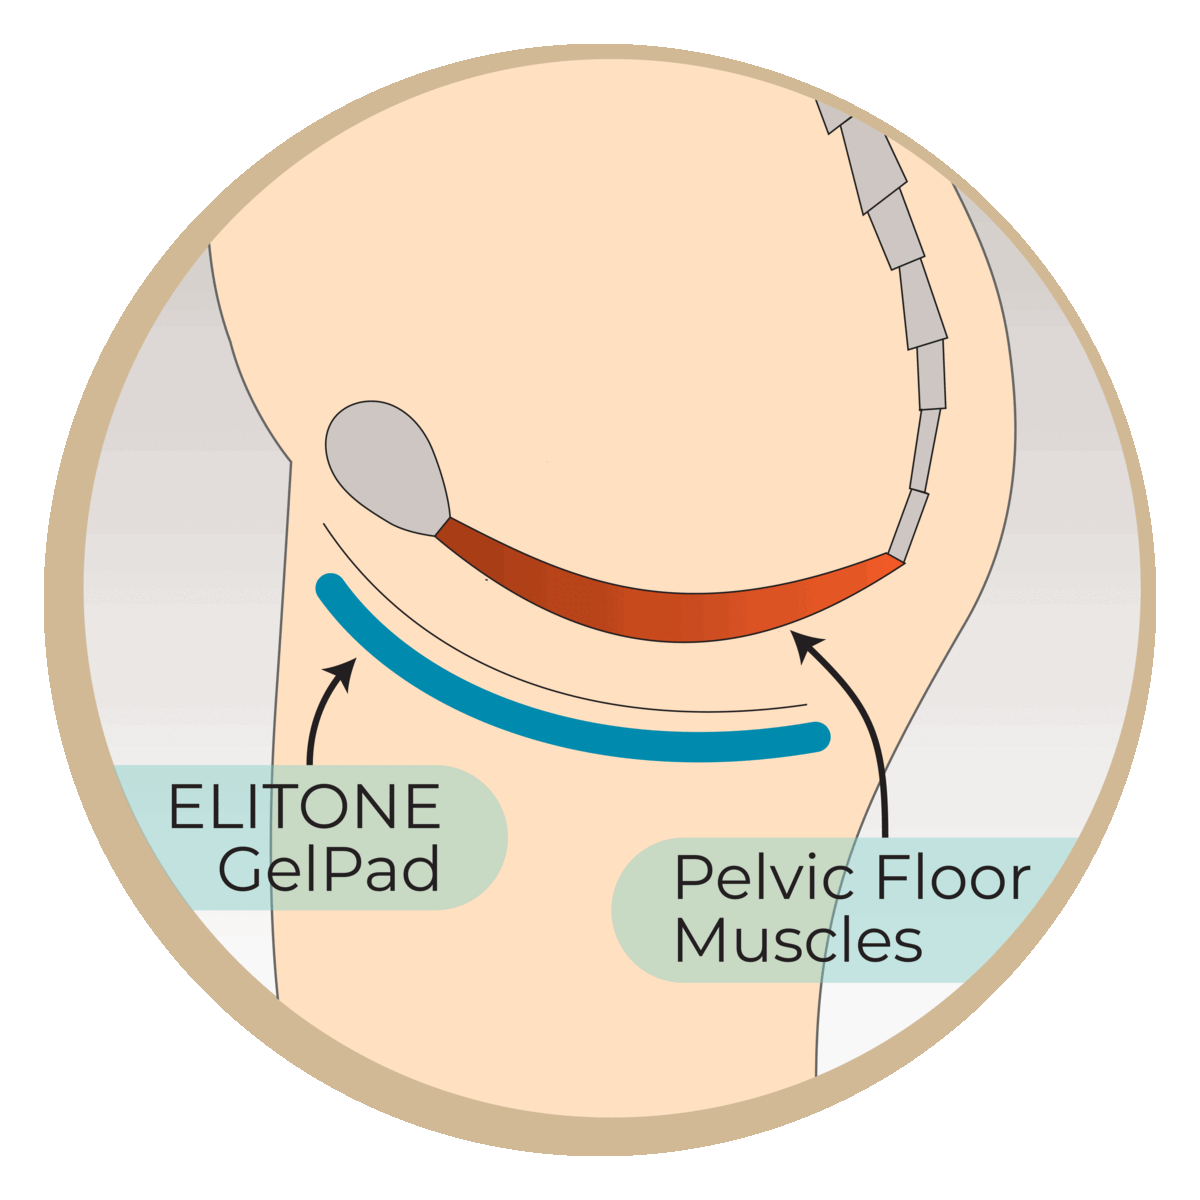 An illustrative diagram, developed by a sexual health expert in Los Angeles, showing the placement of an elitone gelpad in relation to the pelvic floor muscles for therapeutic purposes.